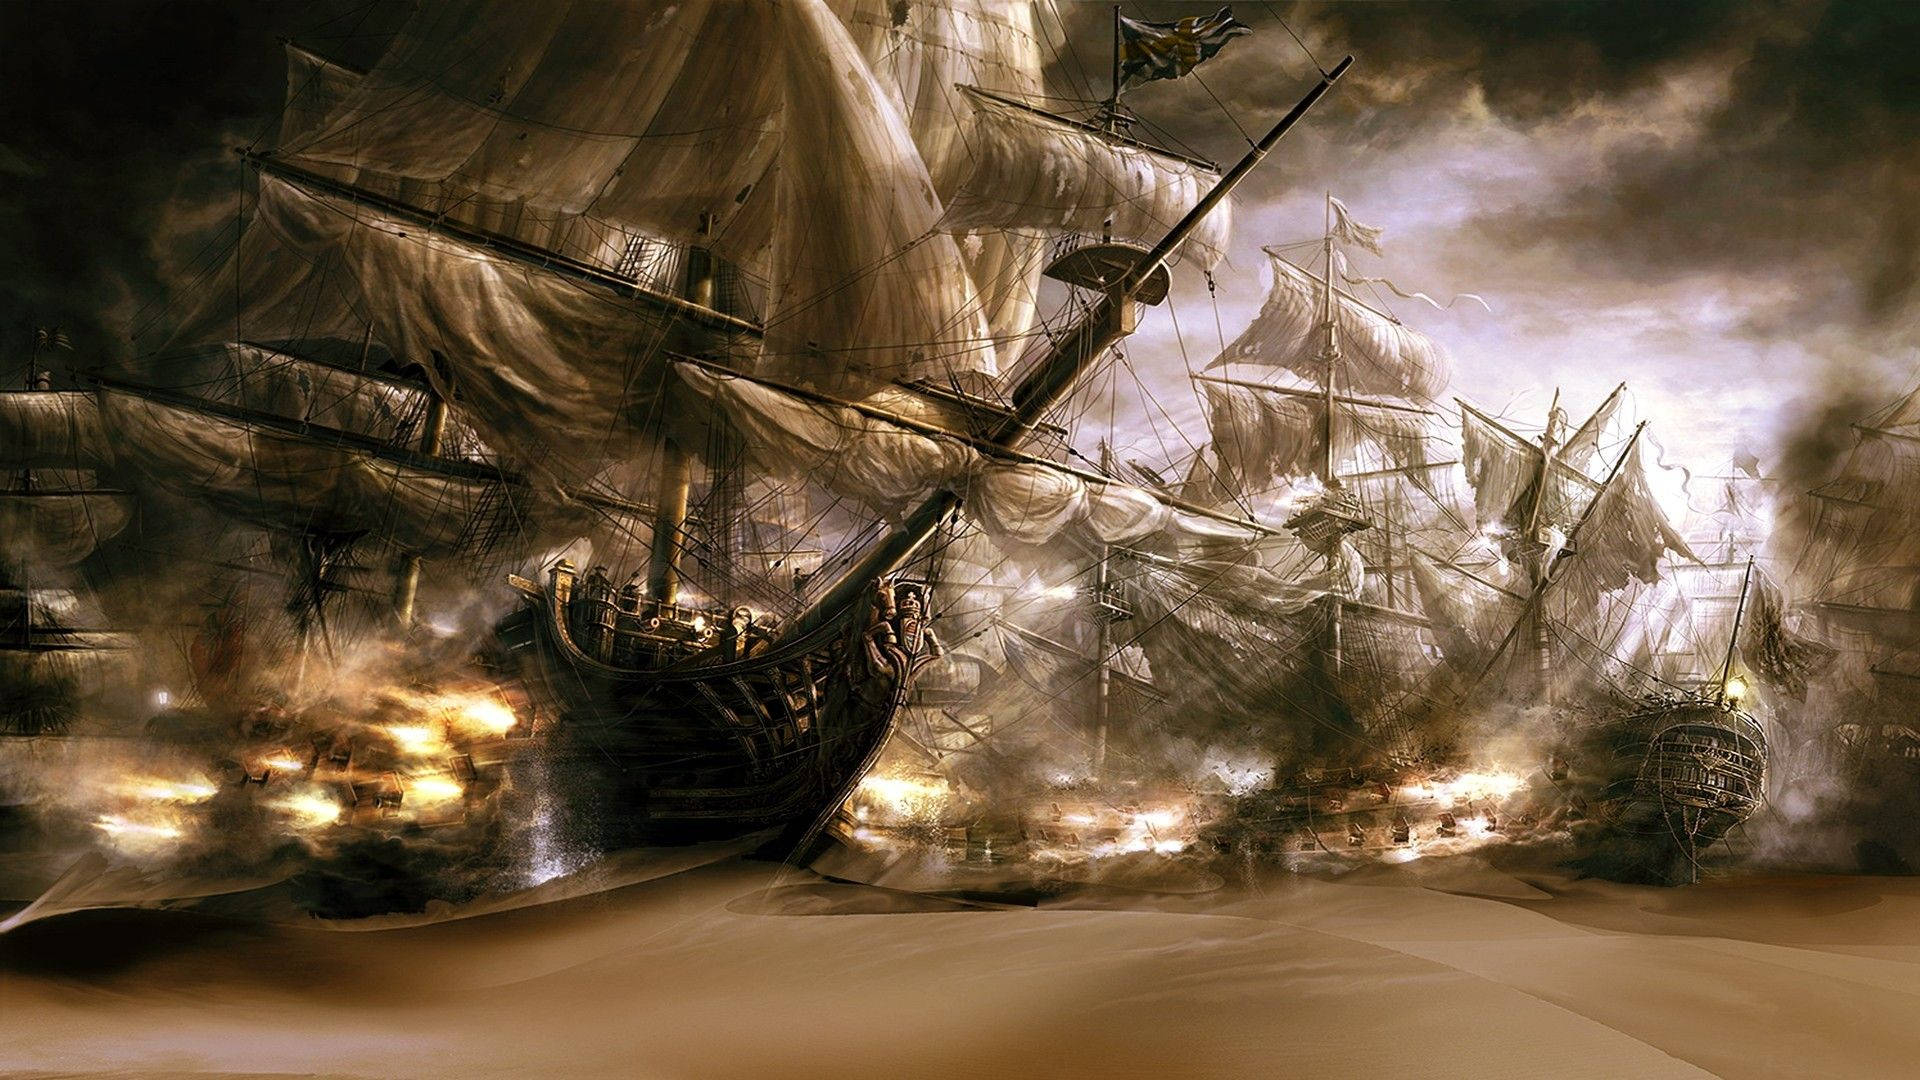 1920x1080 Download Pirate Ships In Sand Wallpaper